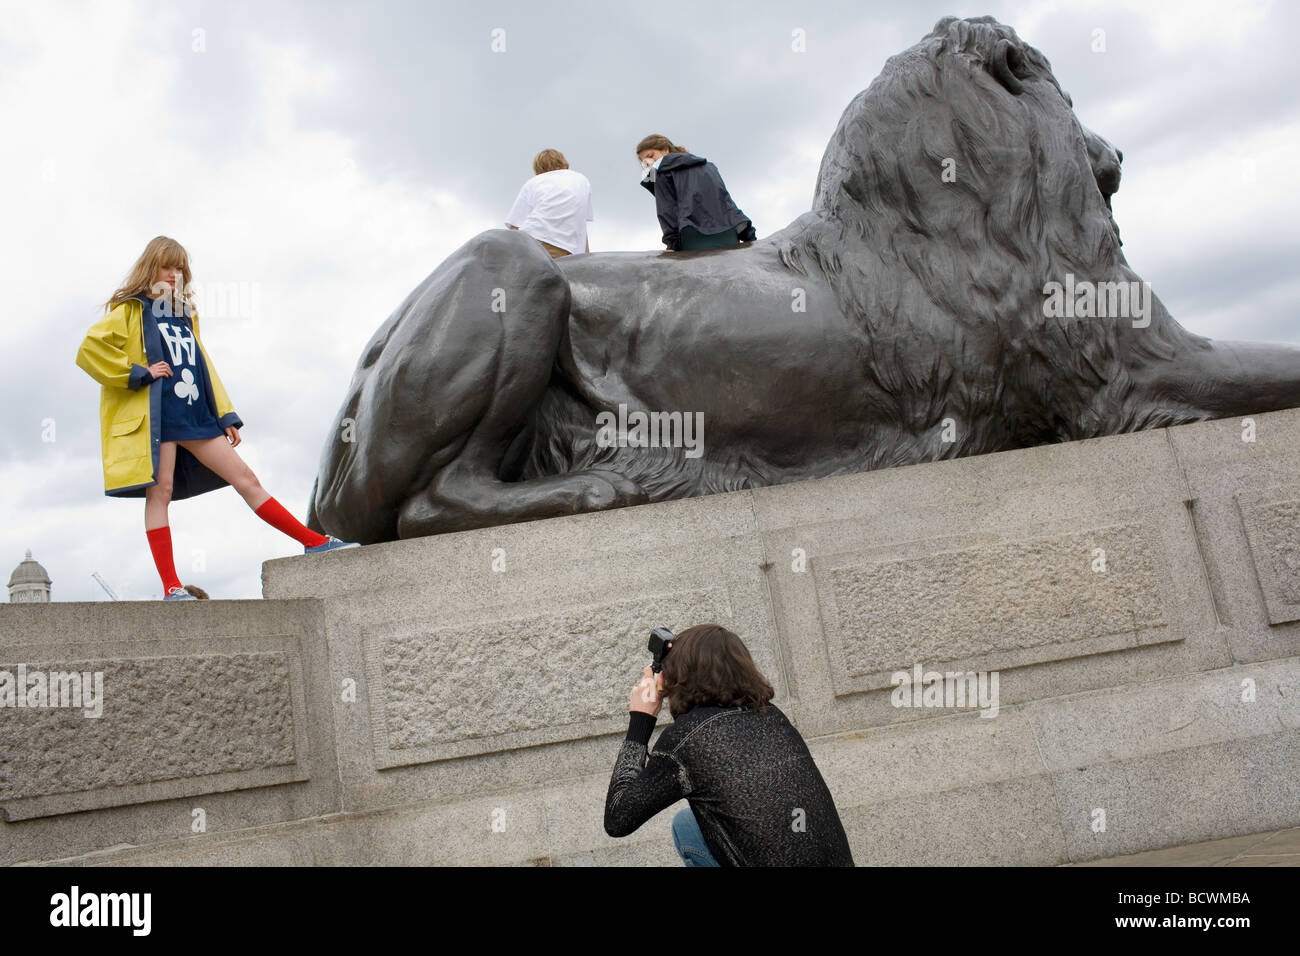 A young man photographs a pretty blonde girl in a yellow coat and red knee high socks posing by the lions in Trafalgar Square Stock Photo